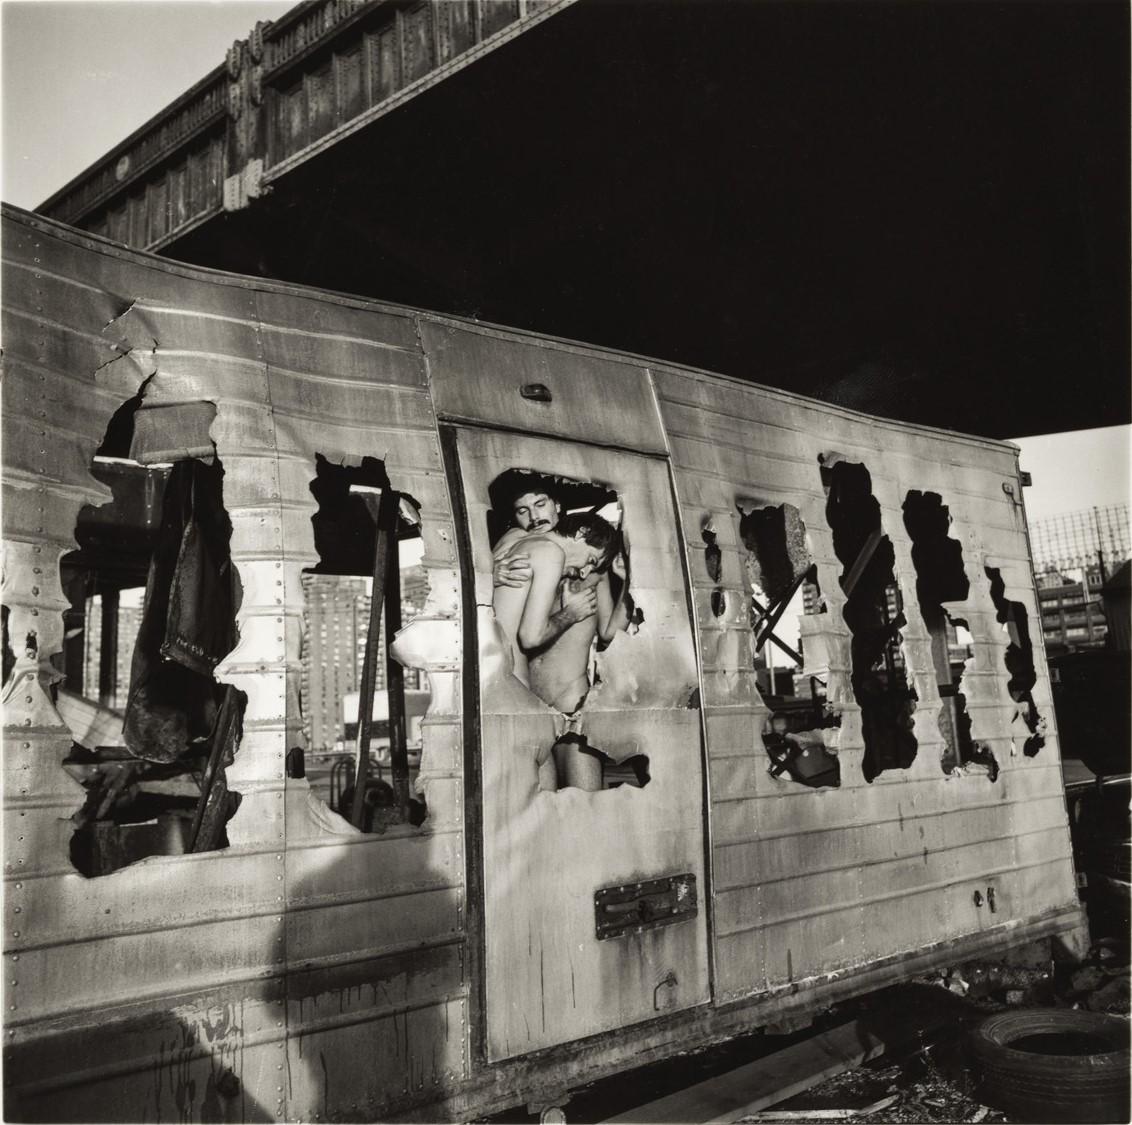 Untitled - Photograph by Arthur Tress